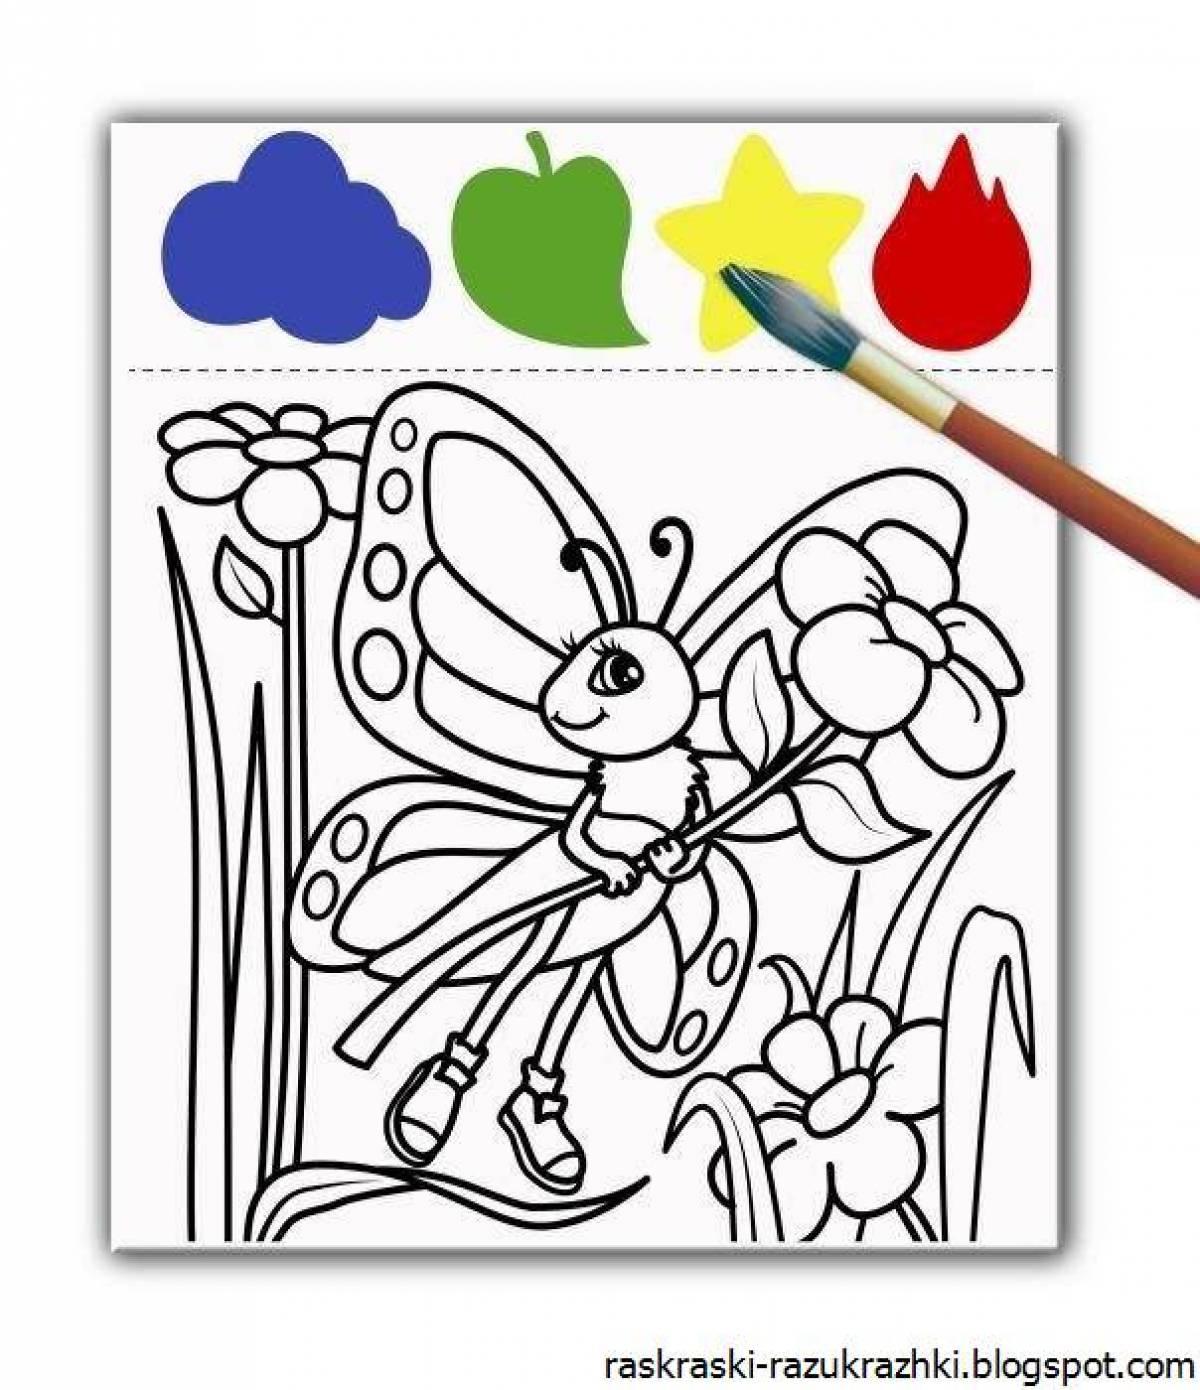 Irresistible coloring pages